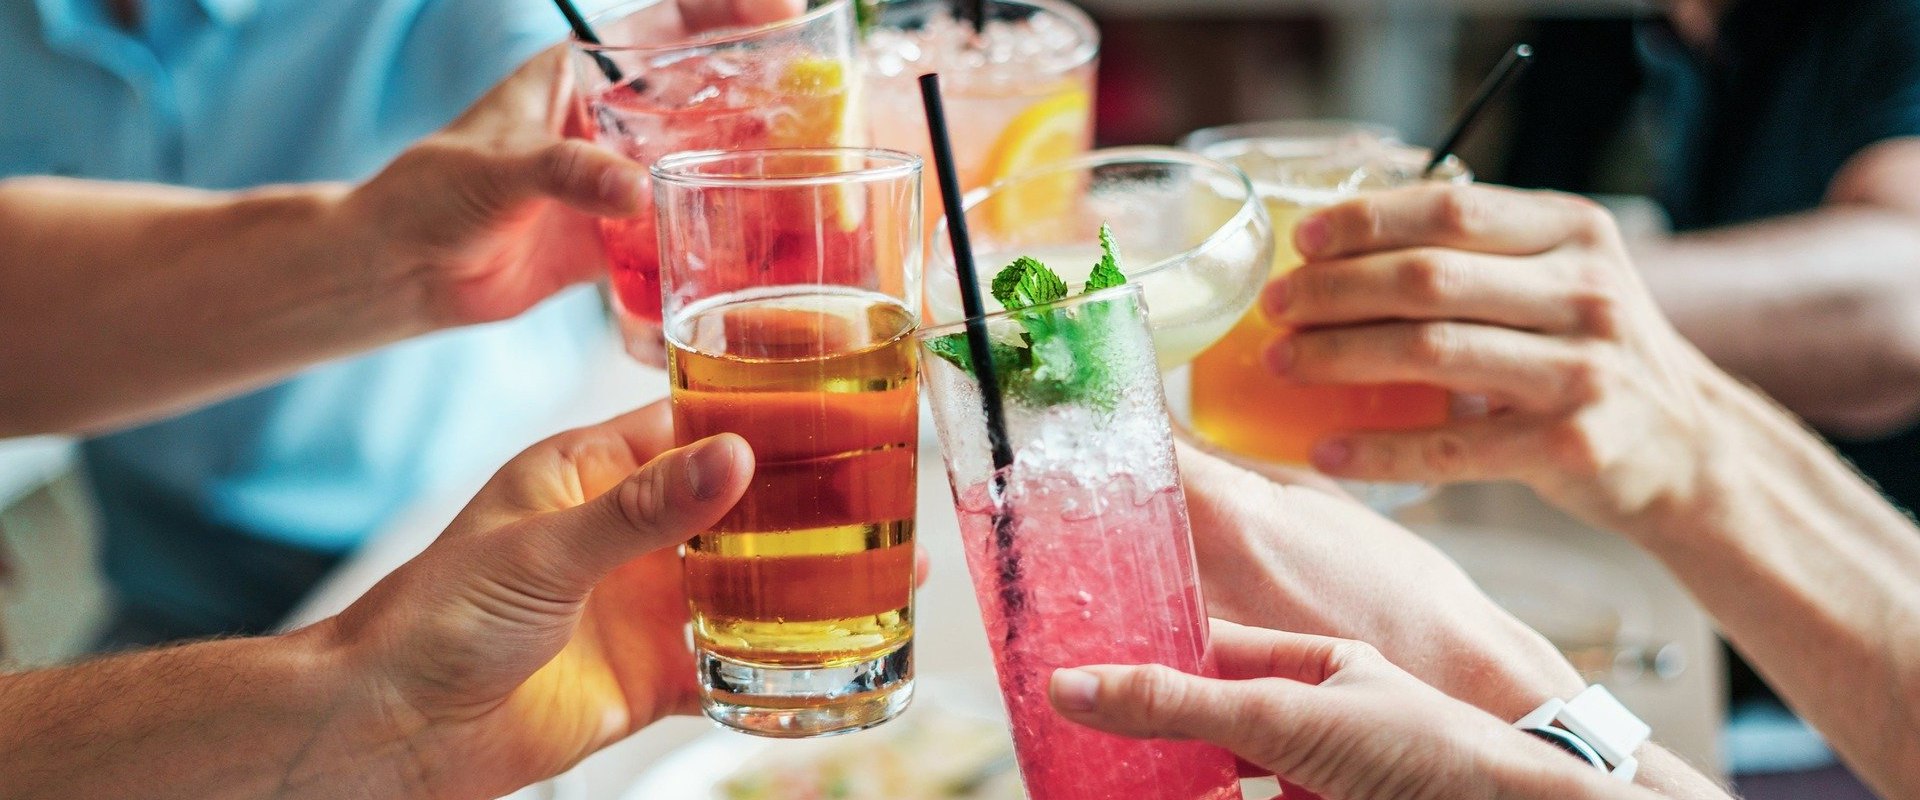 Alcohol Consumption Laws in Indianapolis, Indiana: What You Need to Know